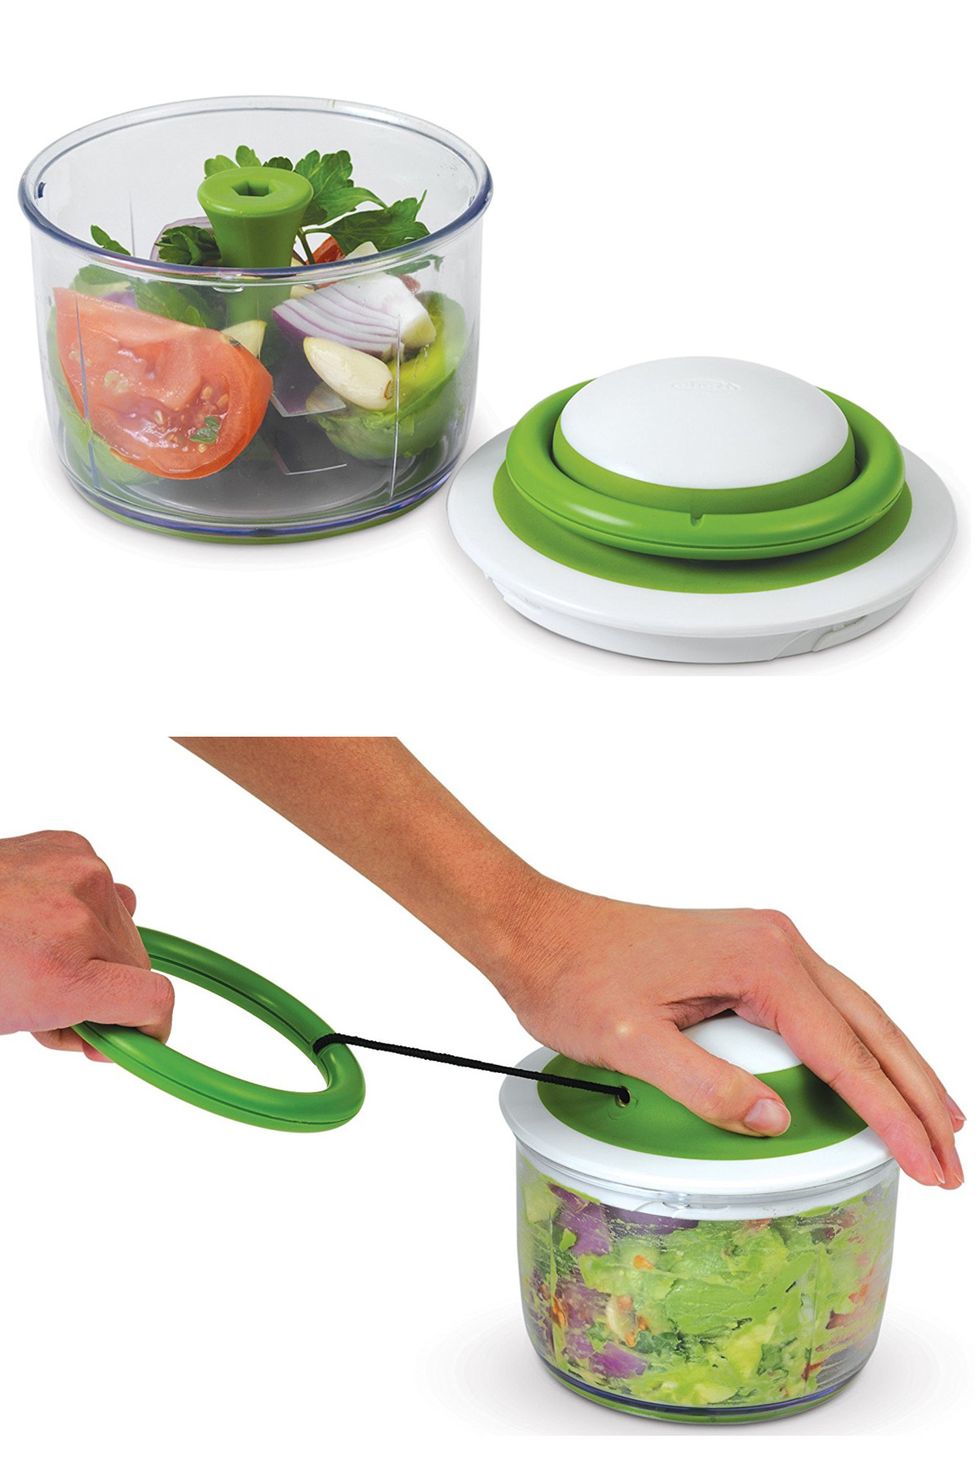 Adaptive Kitchen Equipment (15 Products to Try!) - BLOG